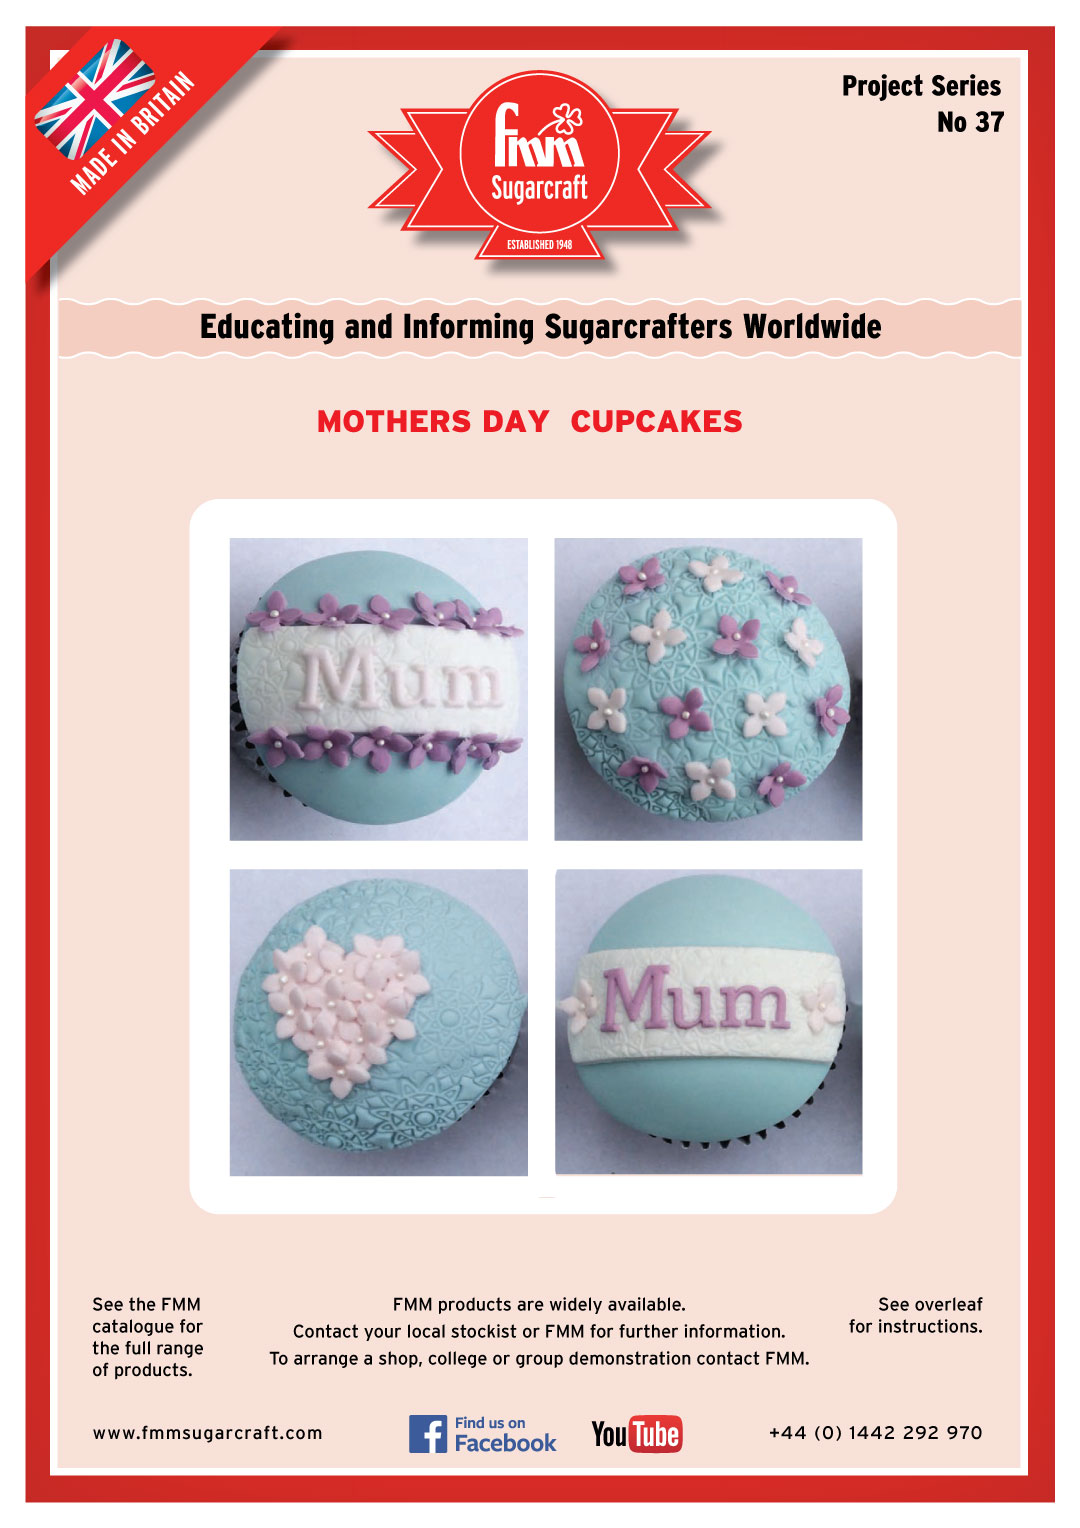 How to make Mothers Day Cupcakes